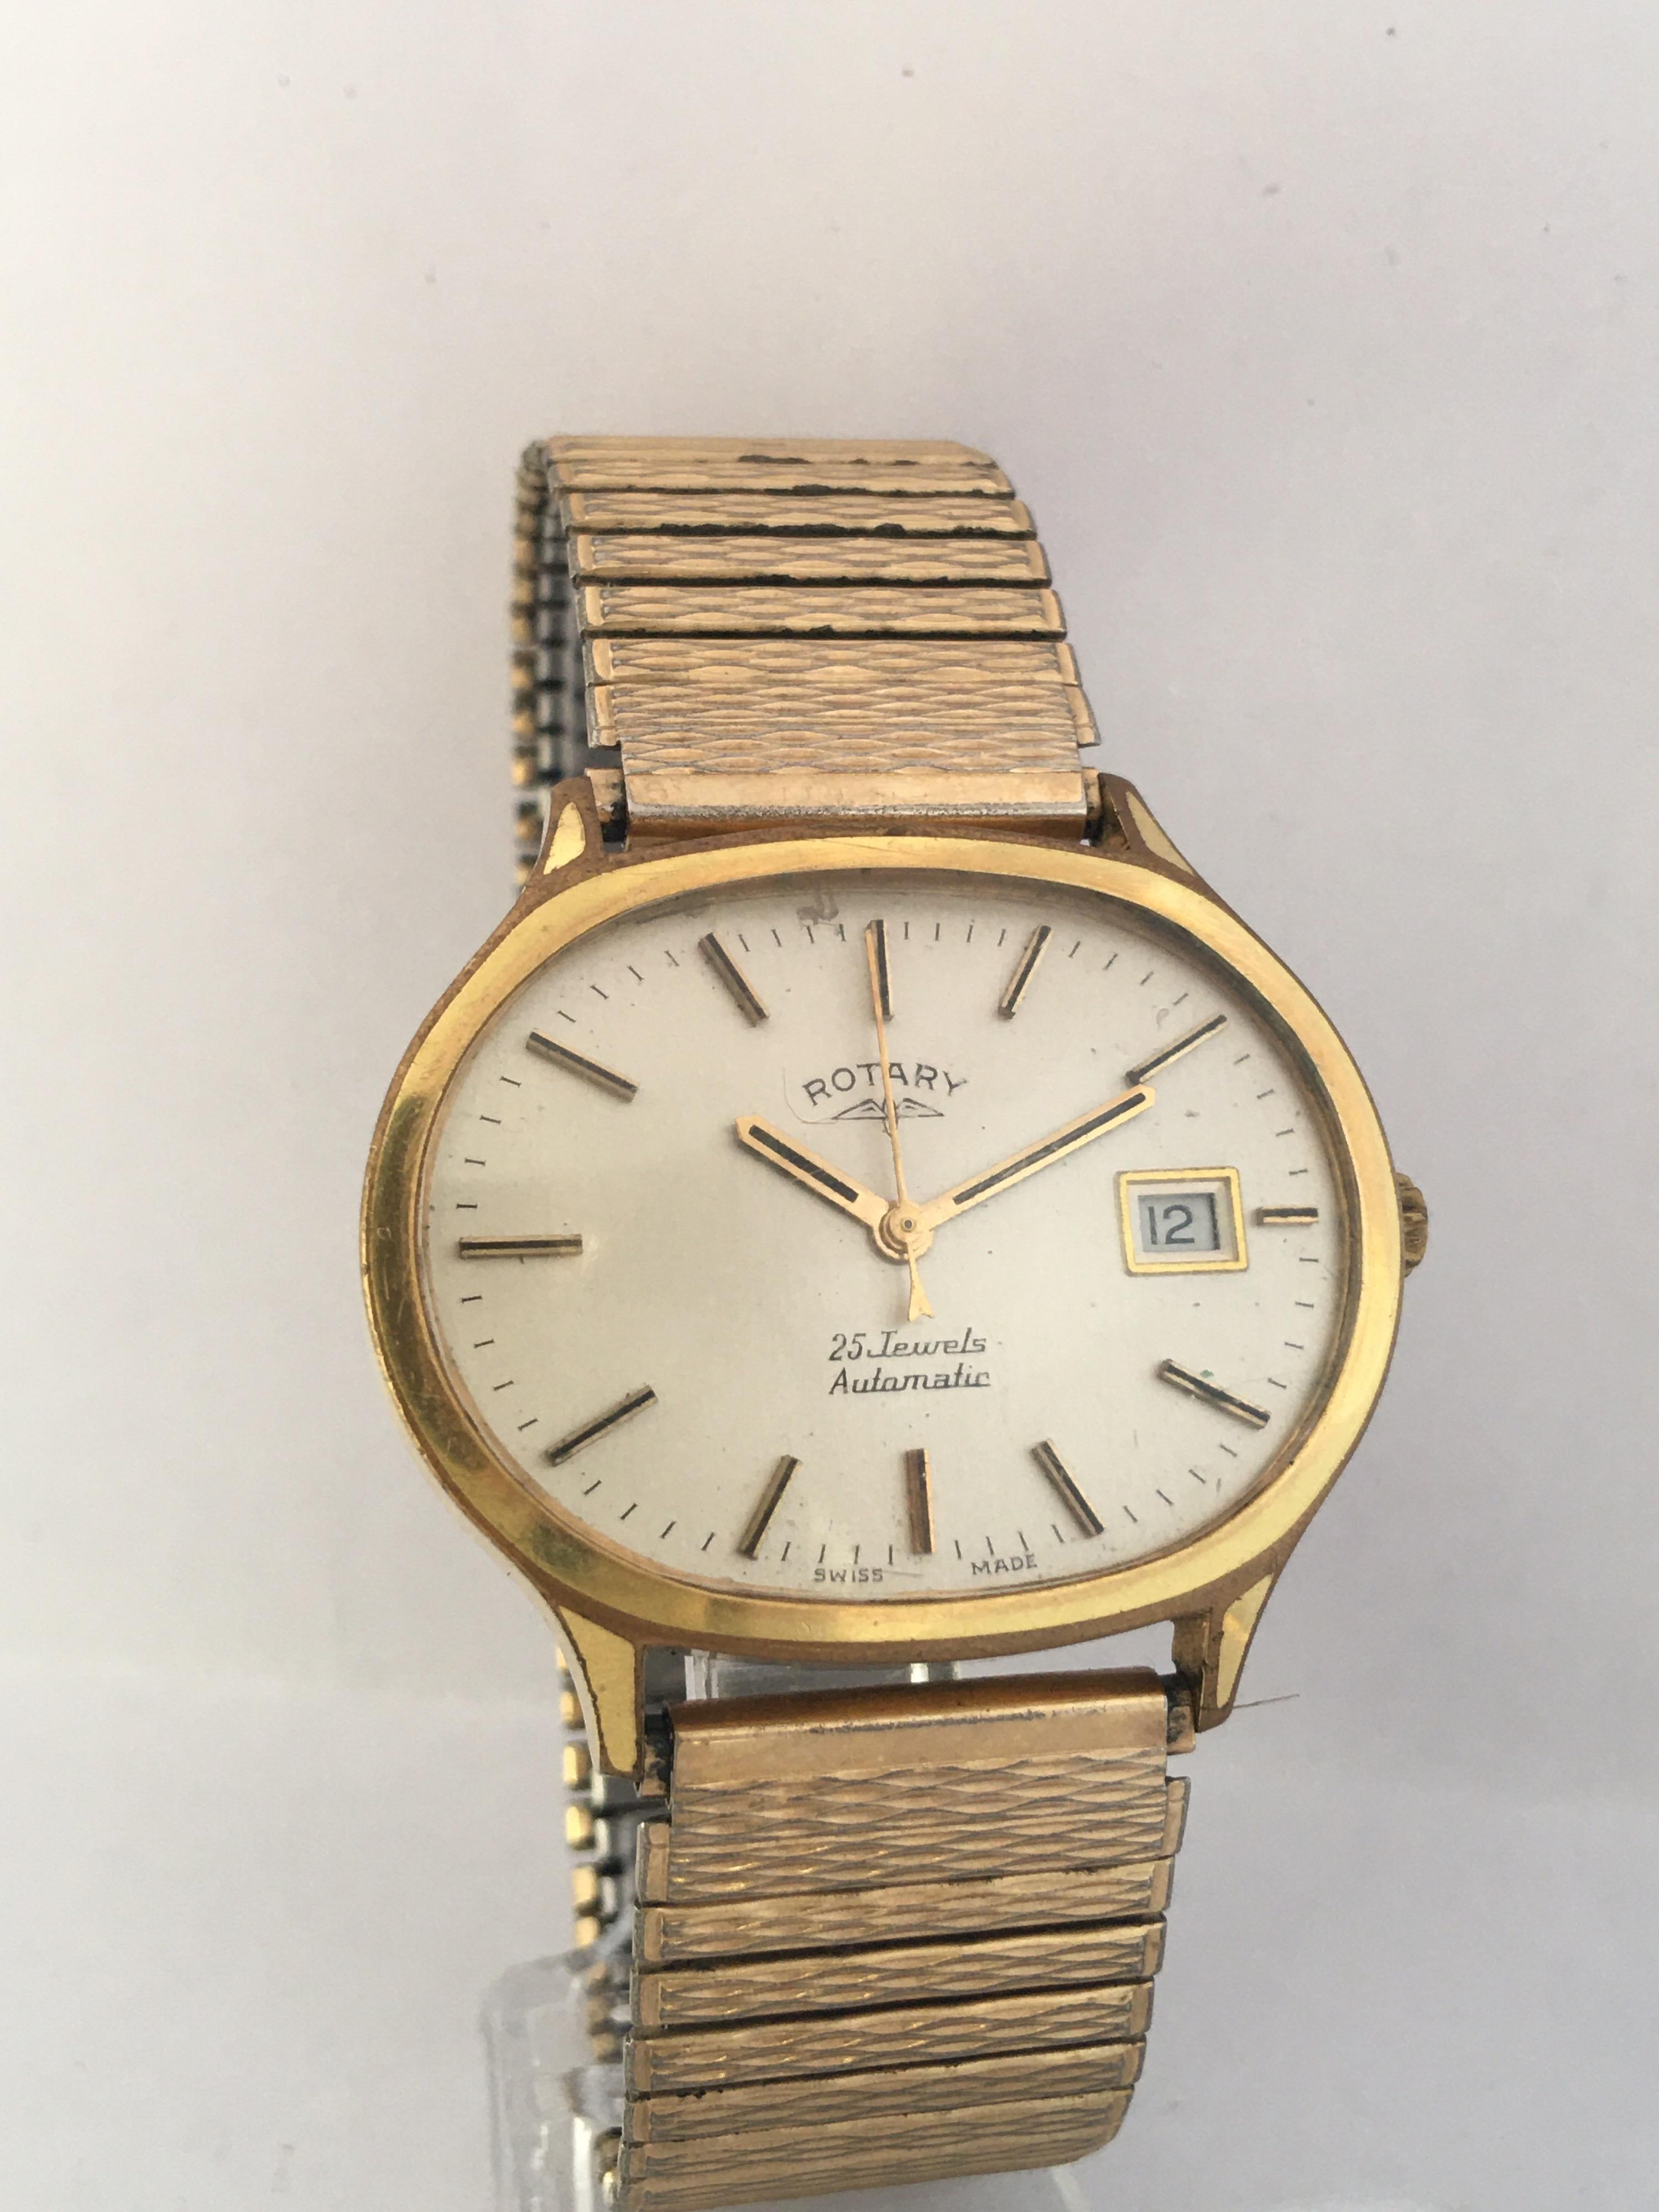 are old rotary watches worth anything